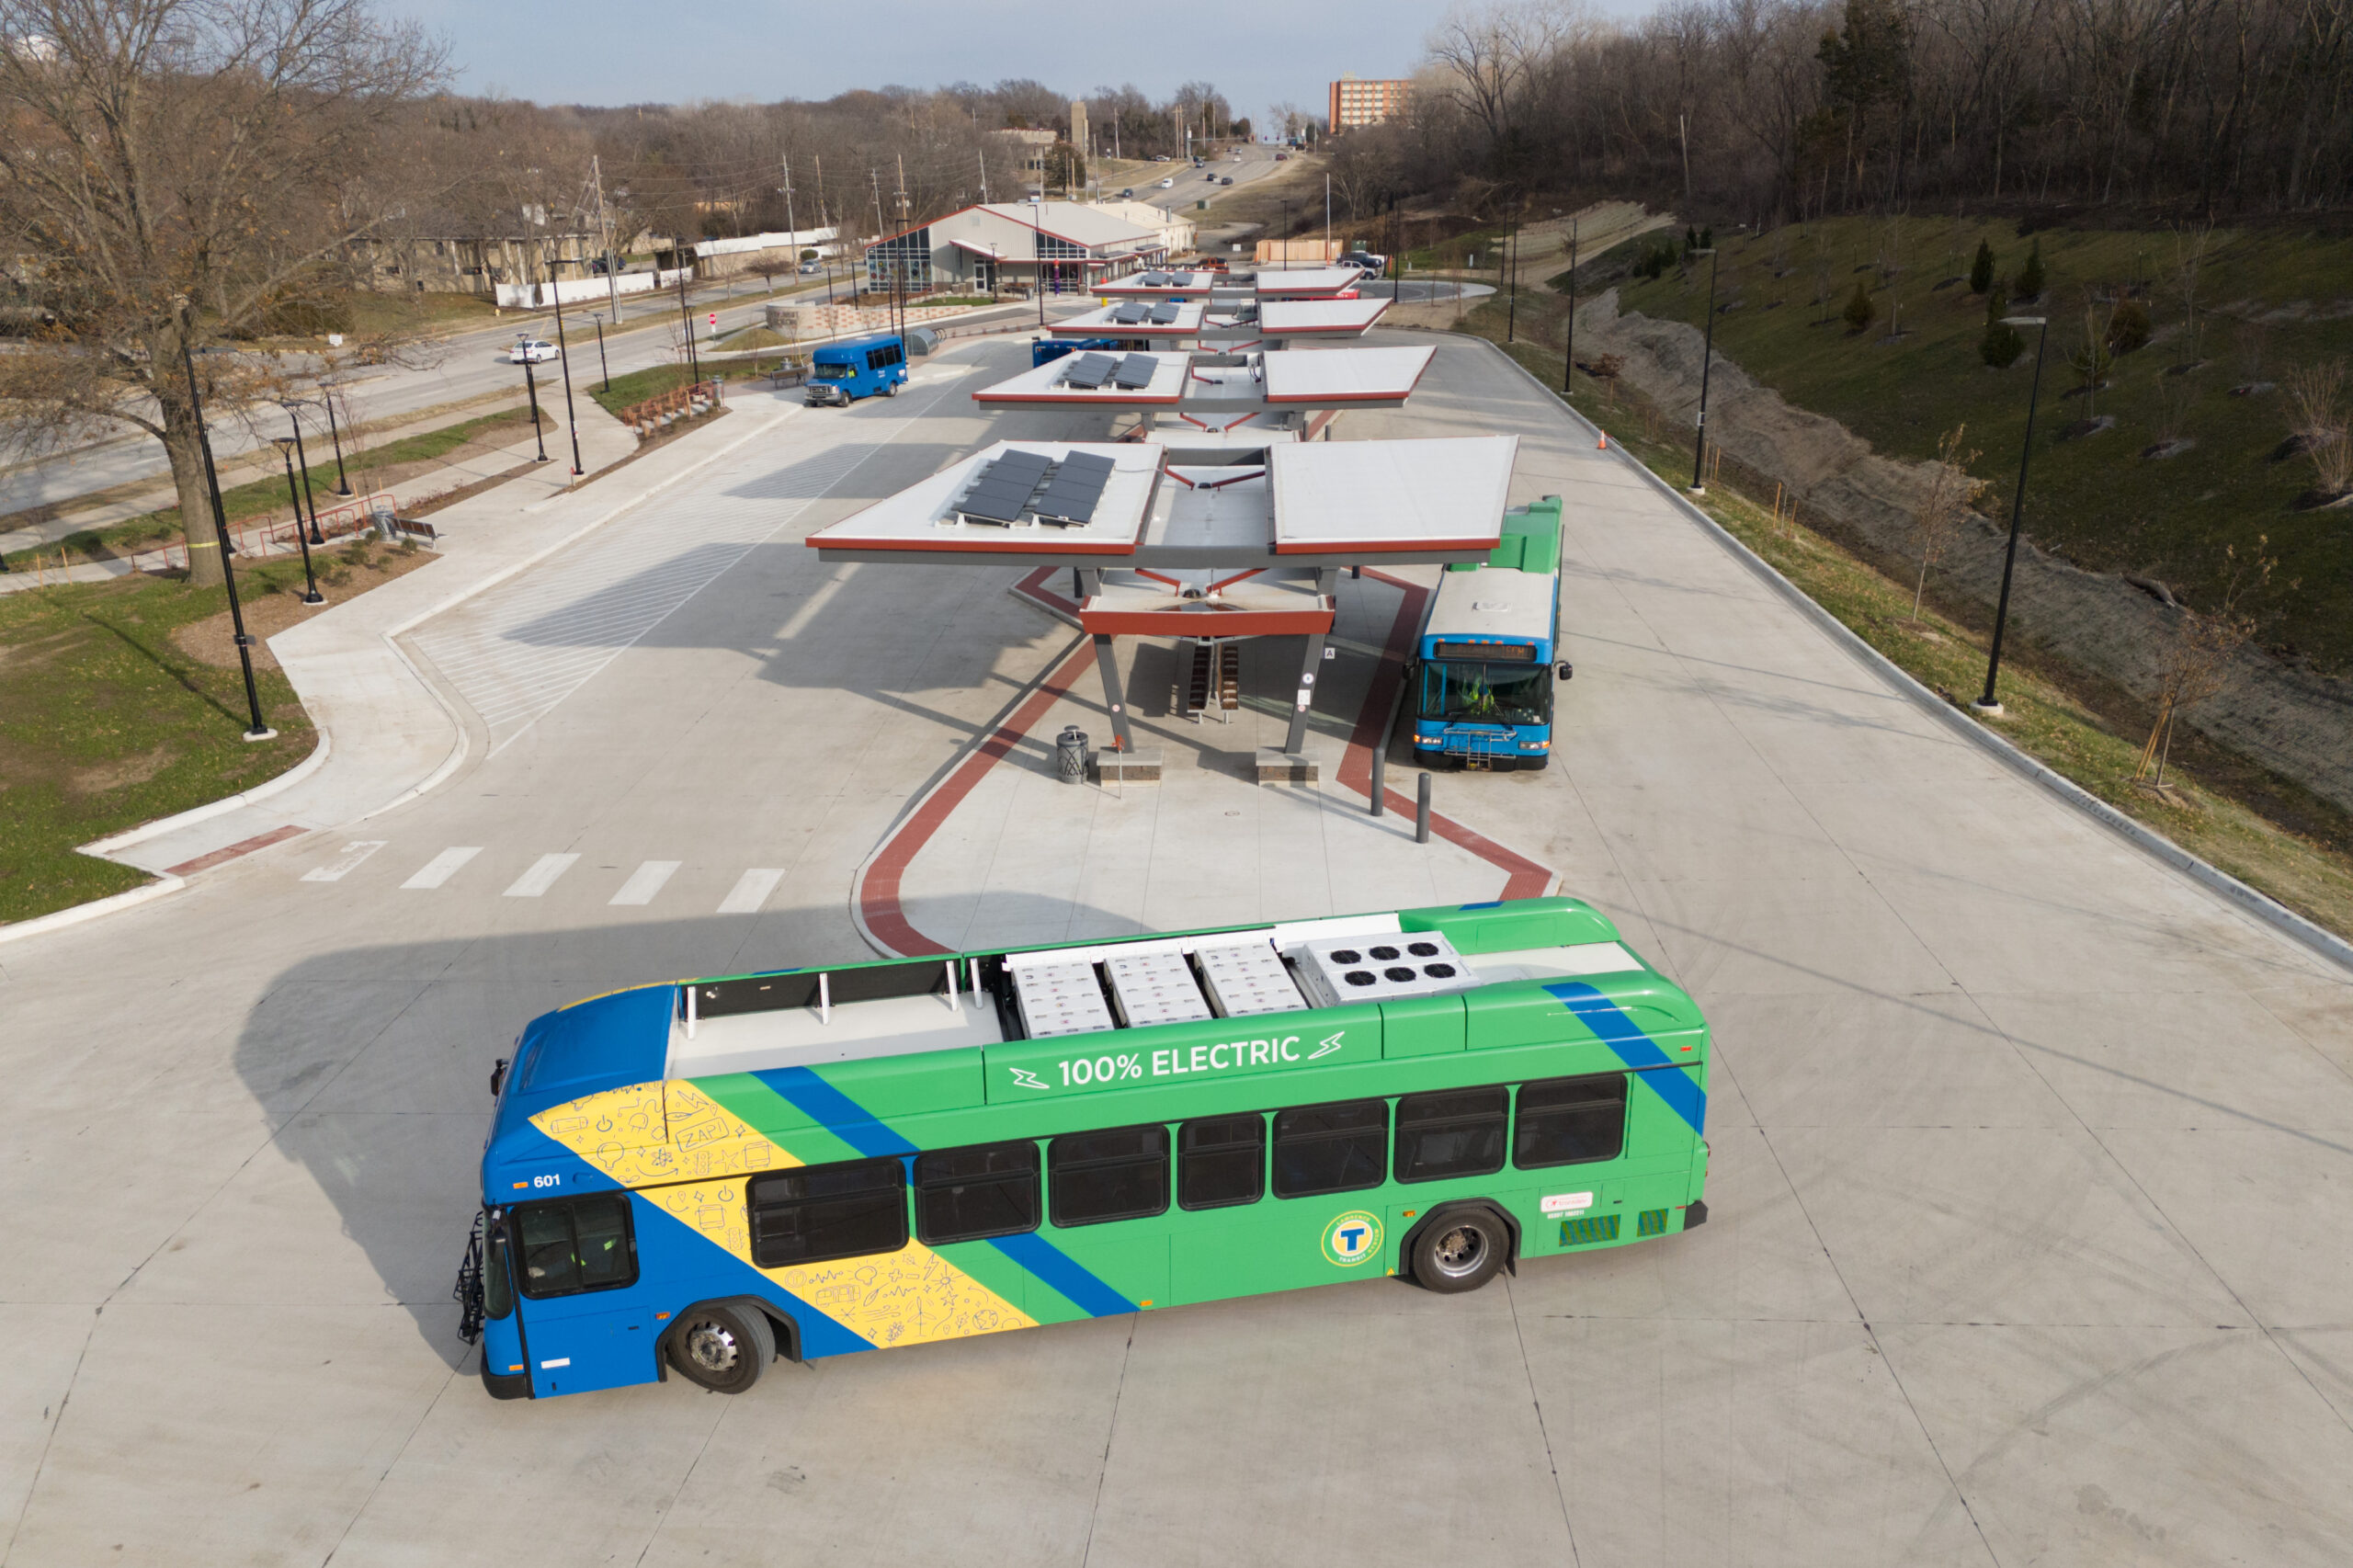 Featured image for “Greyhound to serve Central Station starting Monday, March 25”